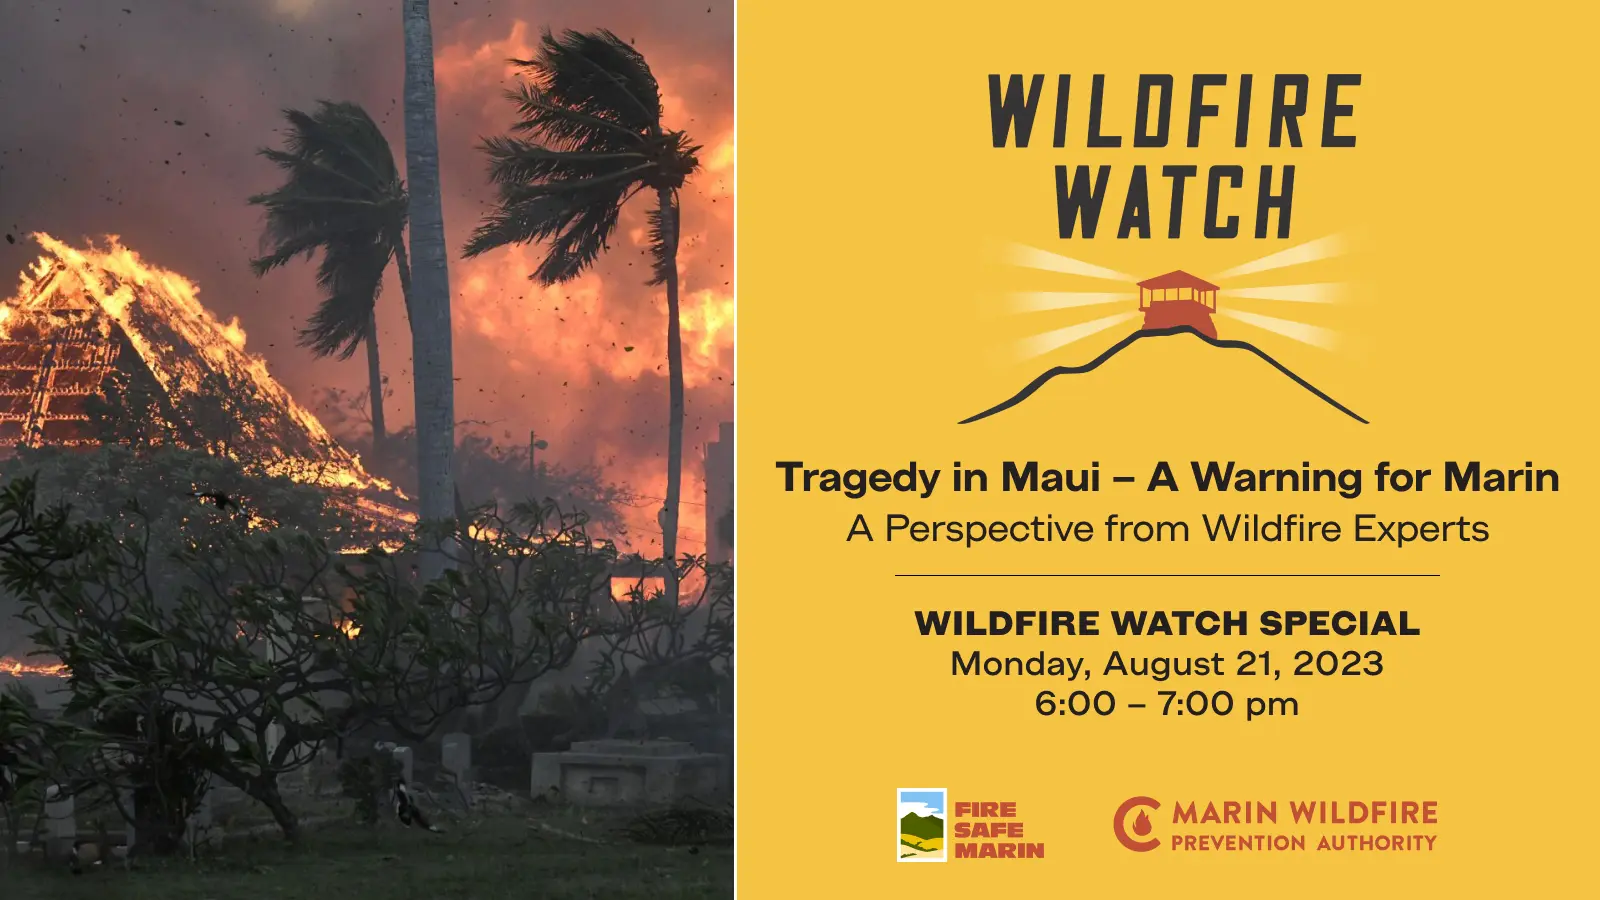 Wildfire Watch:  The Tragedy in Maui is a Warning for Marin